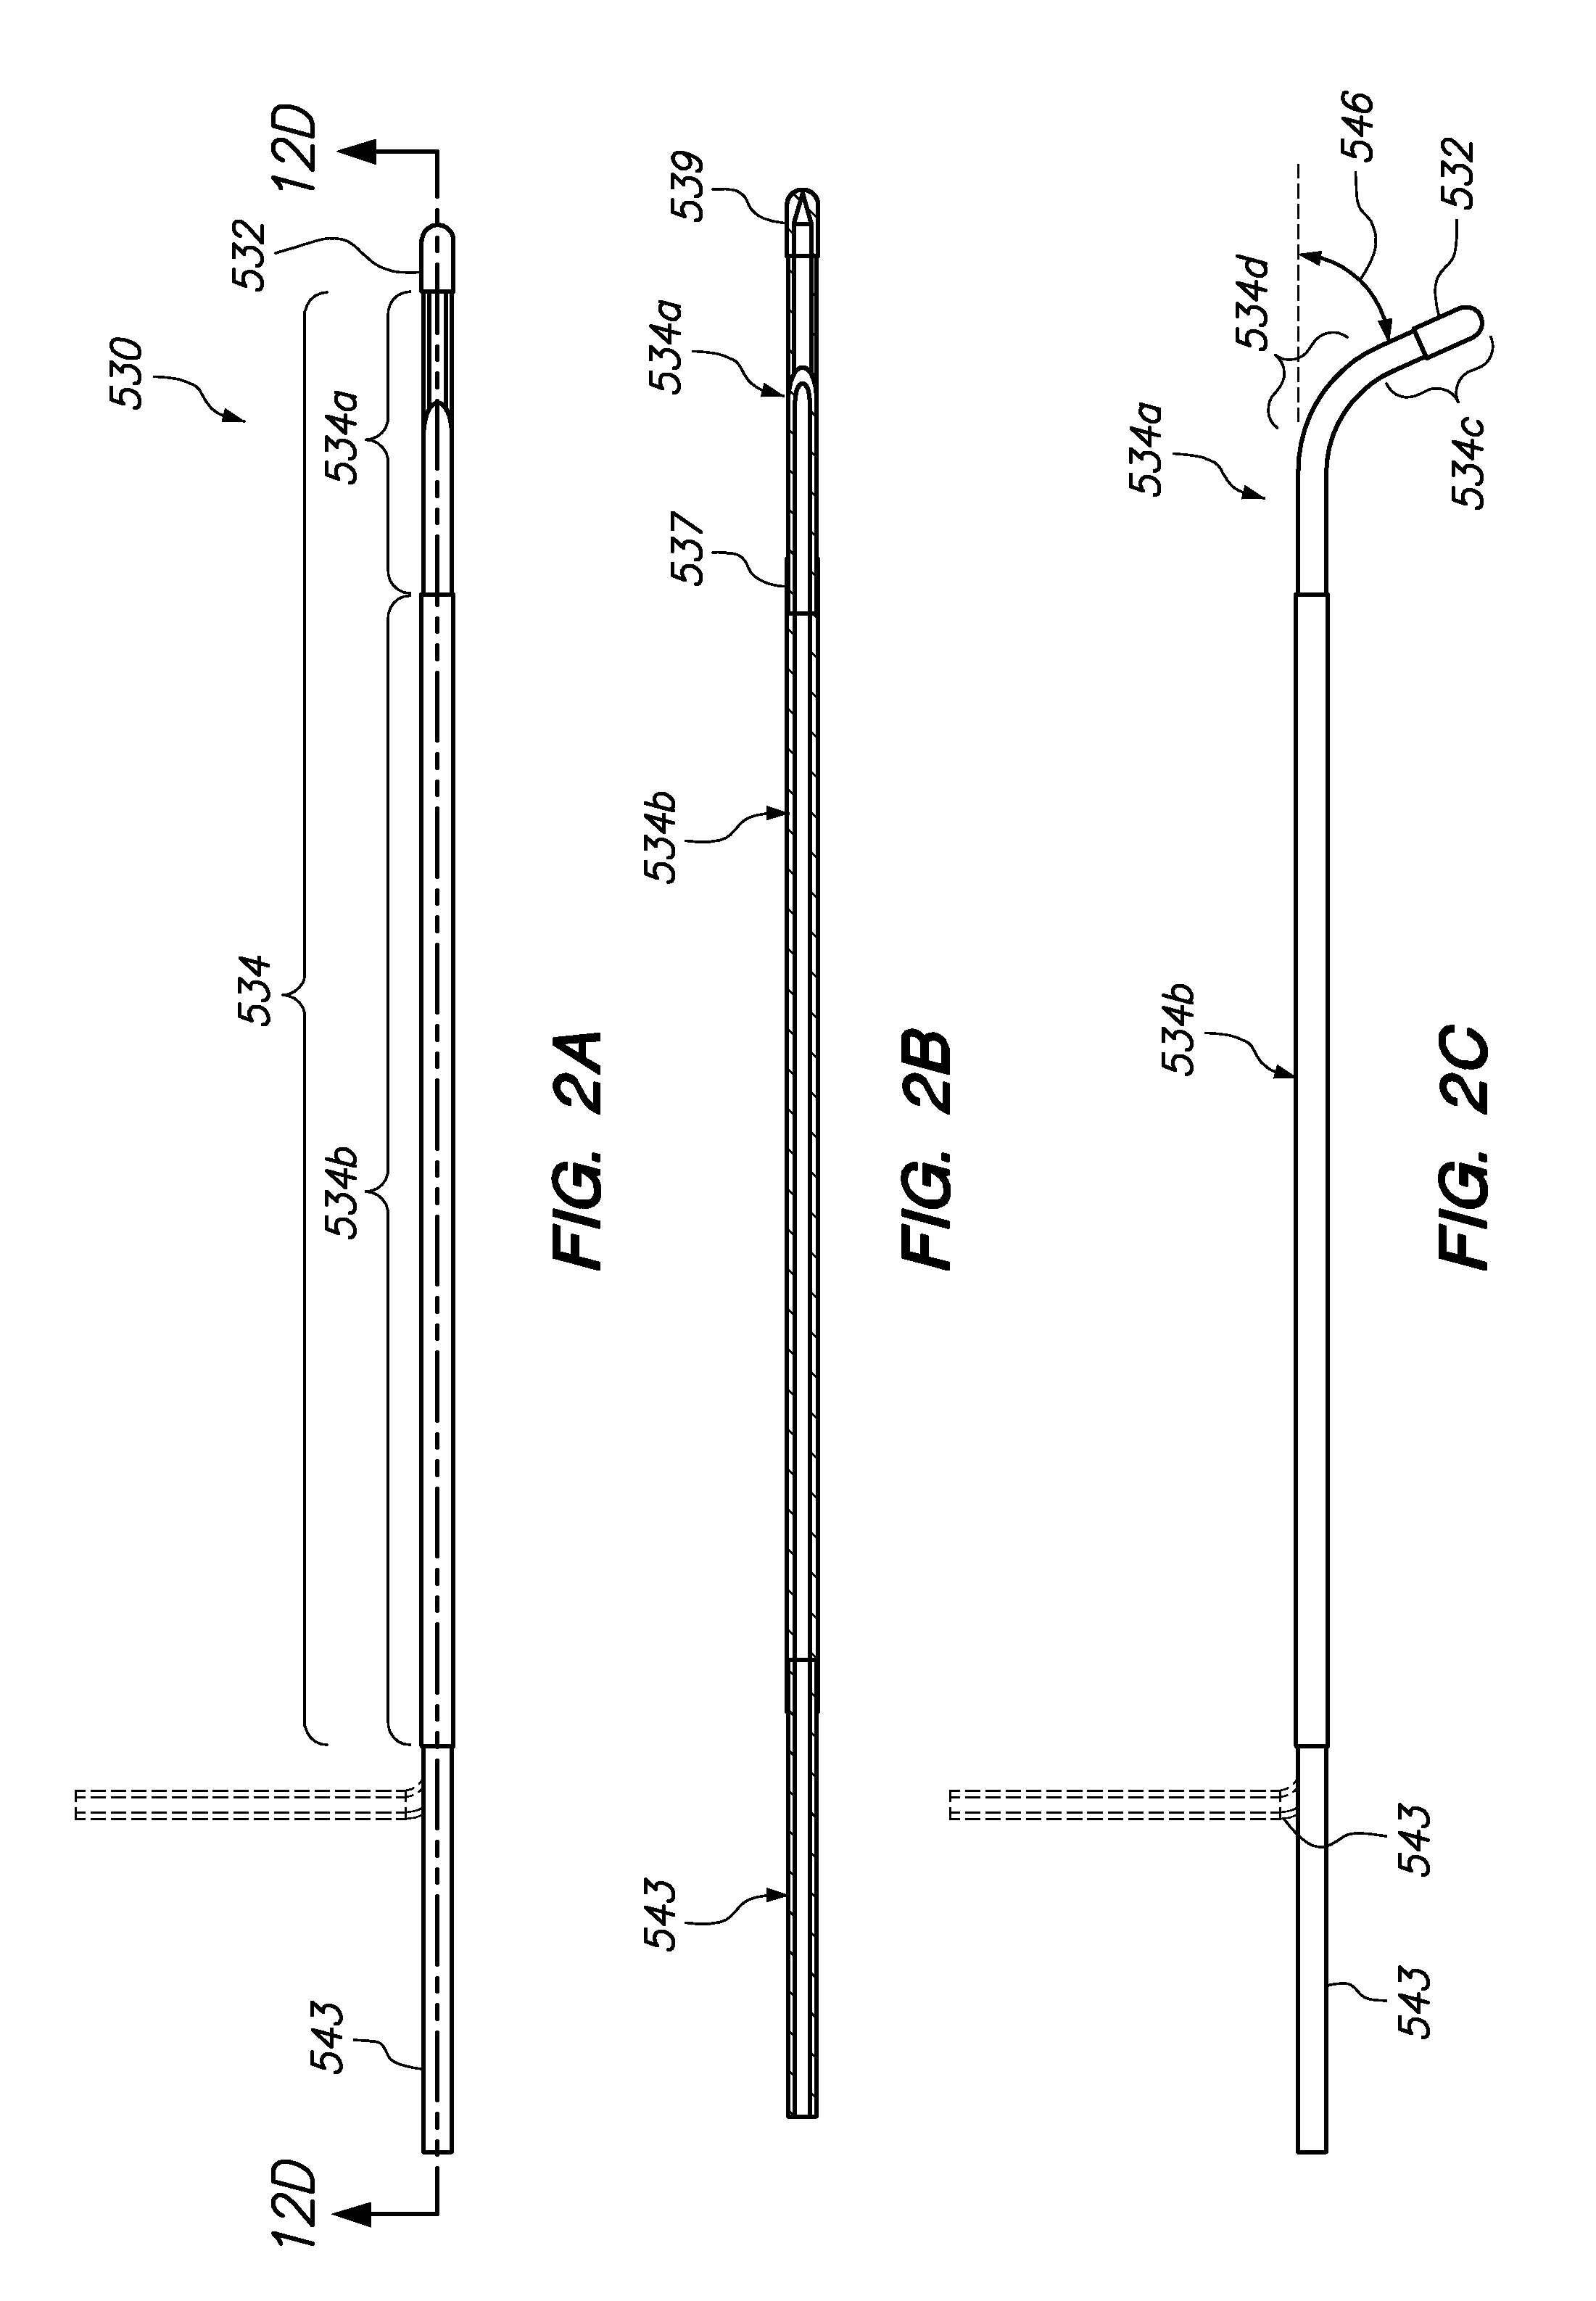 Devices, system and methods for minimally invasive abdominal surgical procedures